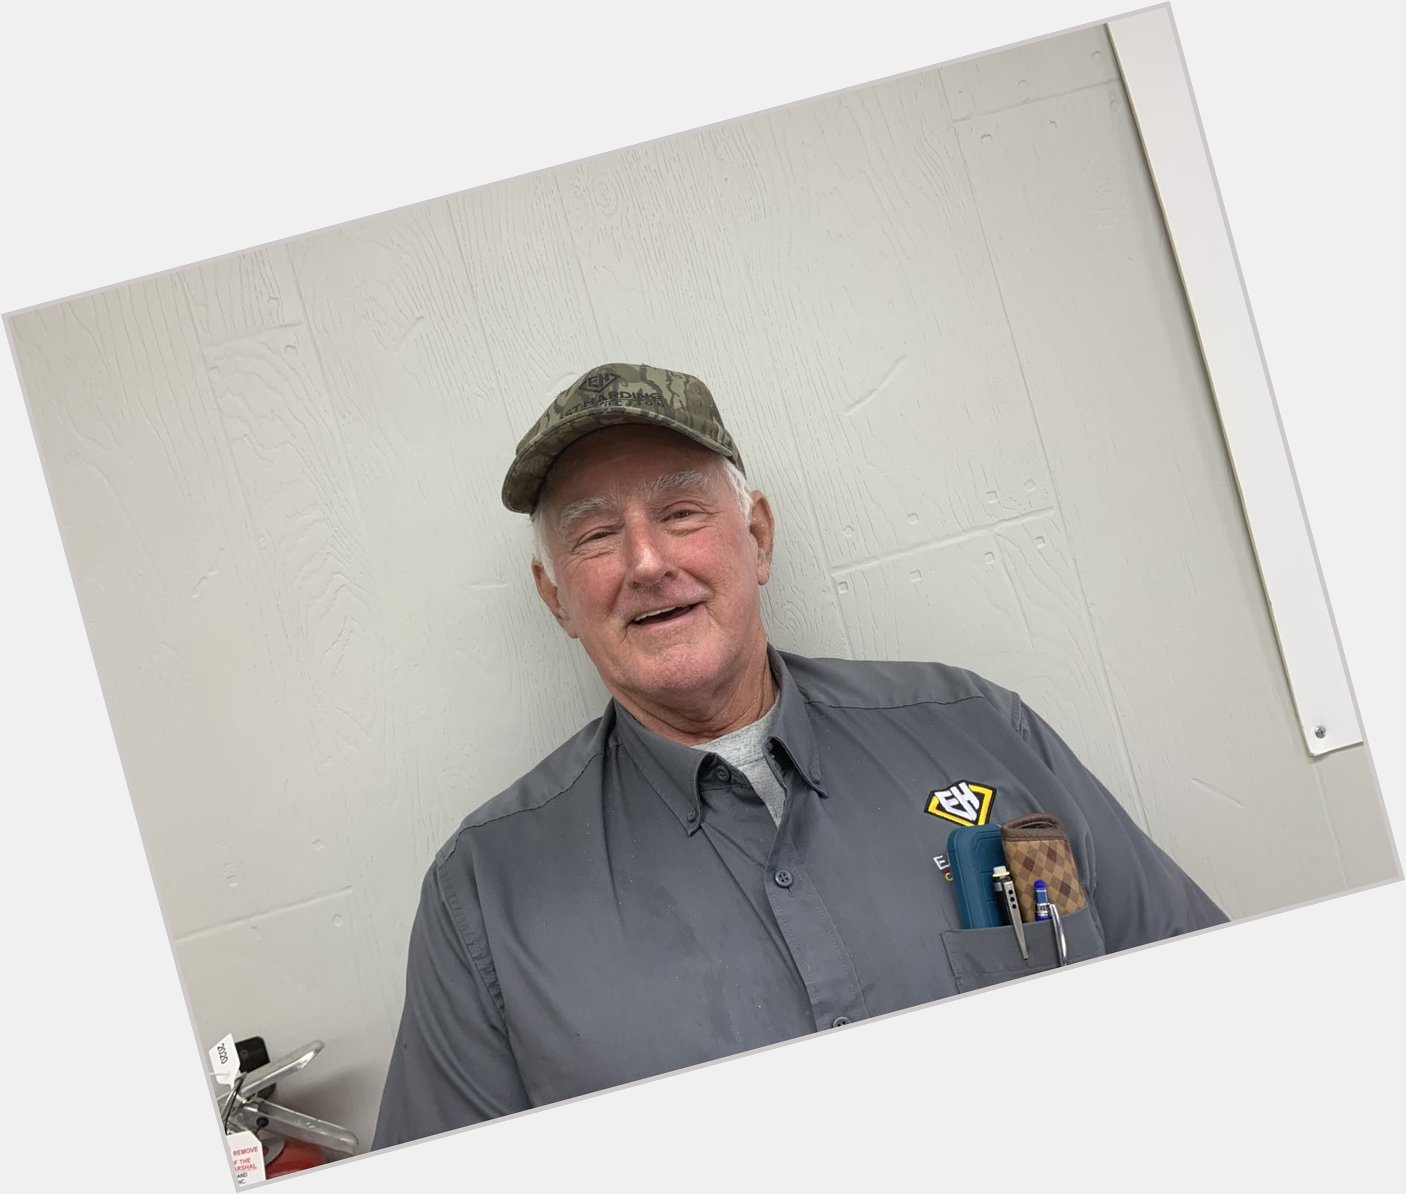 Happy Birthday to Tom Wolfe, Site Superintendent!  Hope you had a fantastic birthday yesterday! 